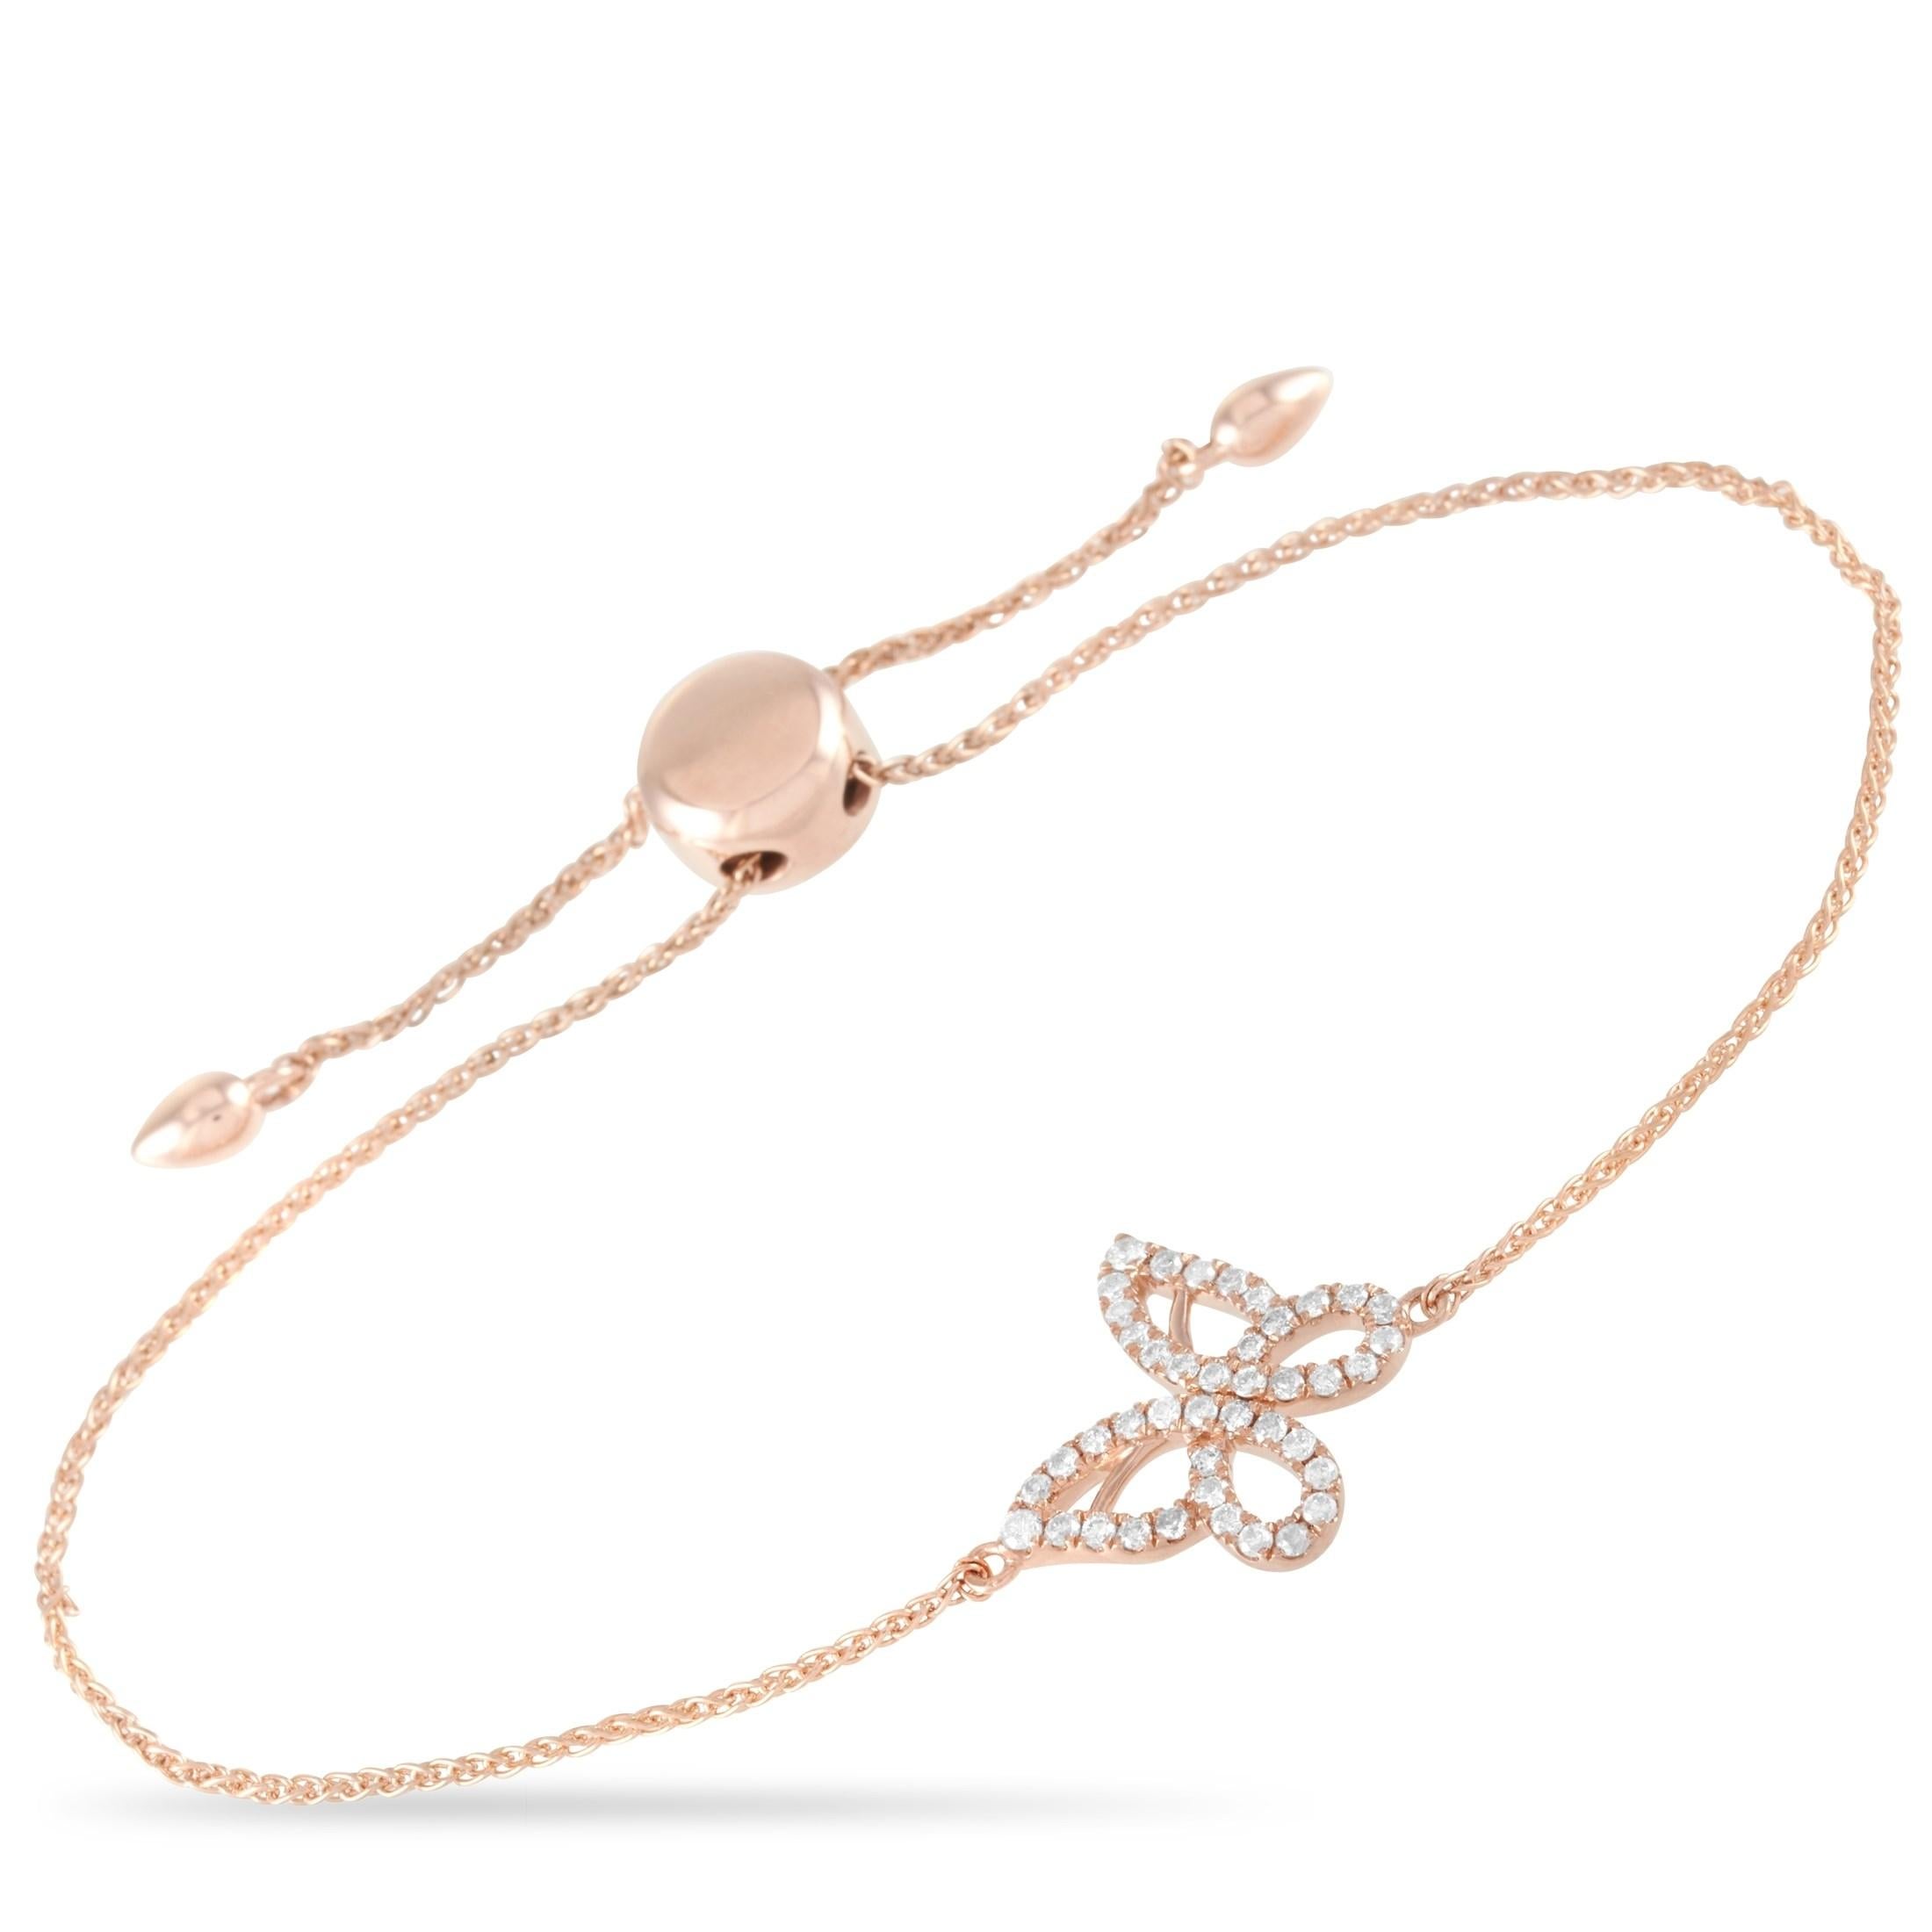 This LB Exclusive butterfly bracelet is made of 14K rose gold and embellished with diamonds that amount to 0.30 carats. The bracelet weighs 4 grams and measures 6.50” in length, which is adjustable.

Offered in brand-new condition, this jewelry